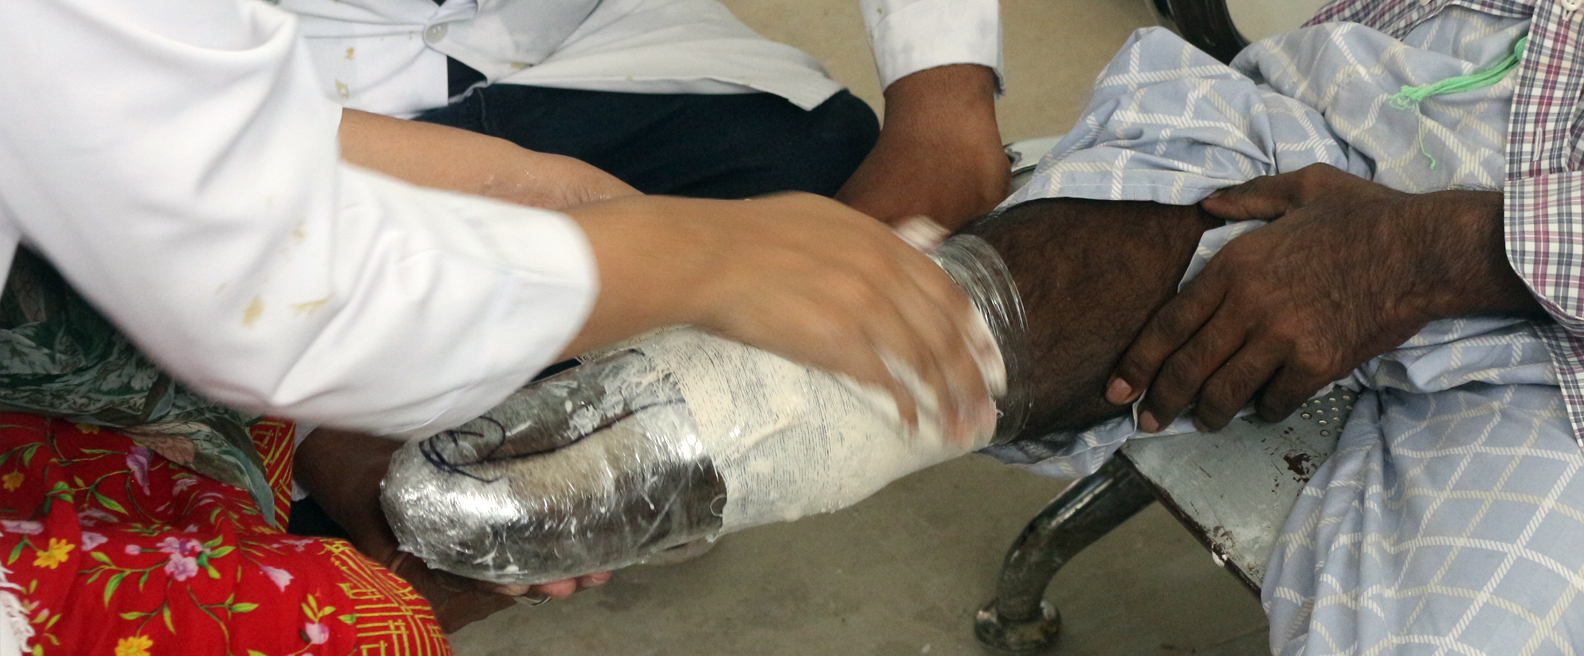 Artificial limb is fitted to a patient at Healthcare and Social Welfare Association, Karachi